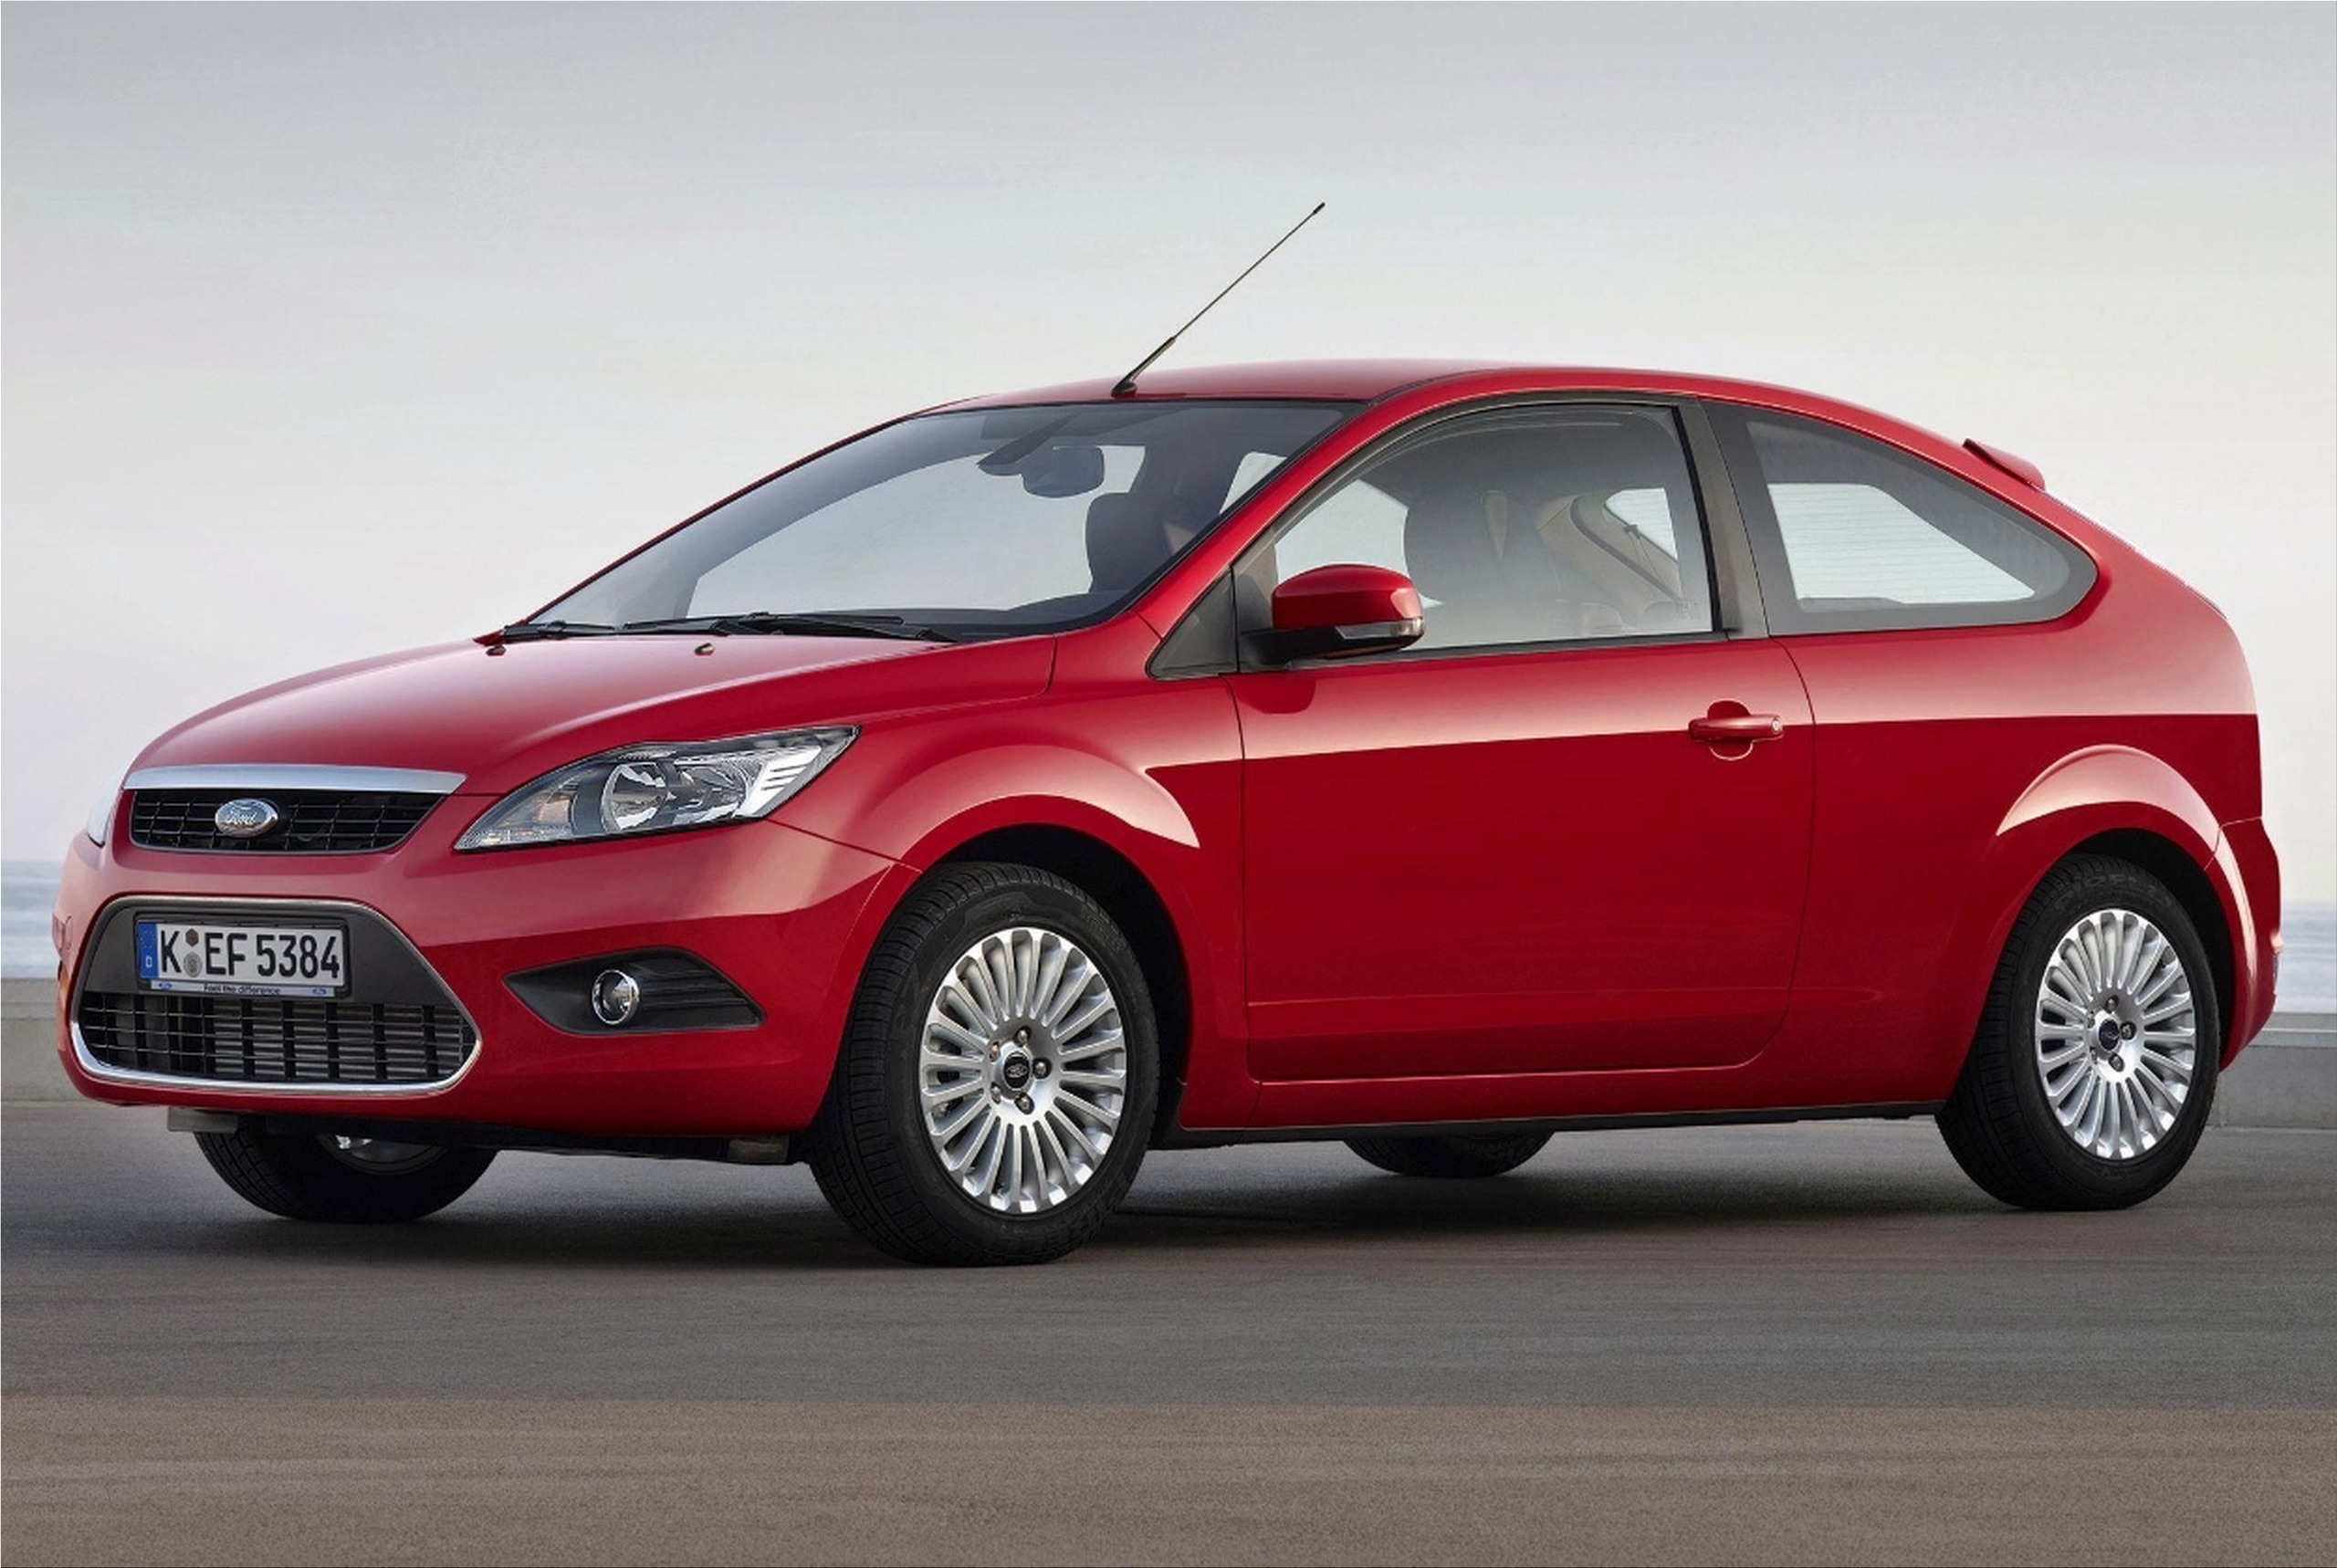 Ford Focus Production To End In 2025: Official